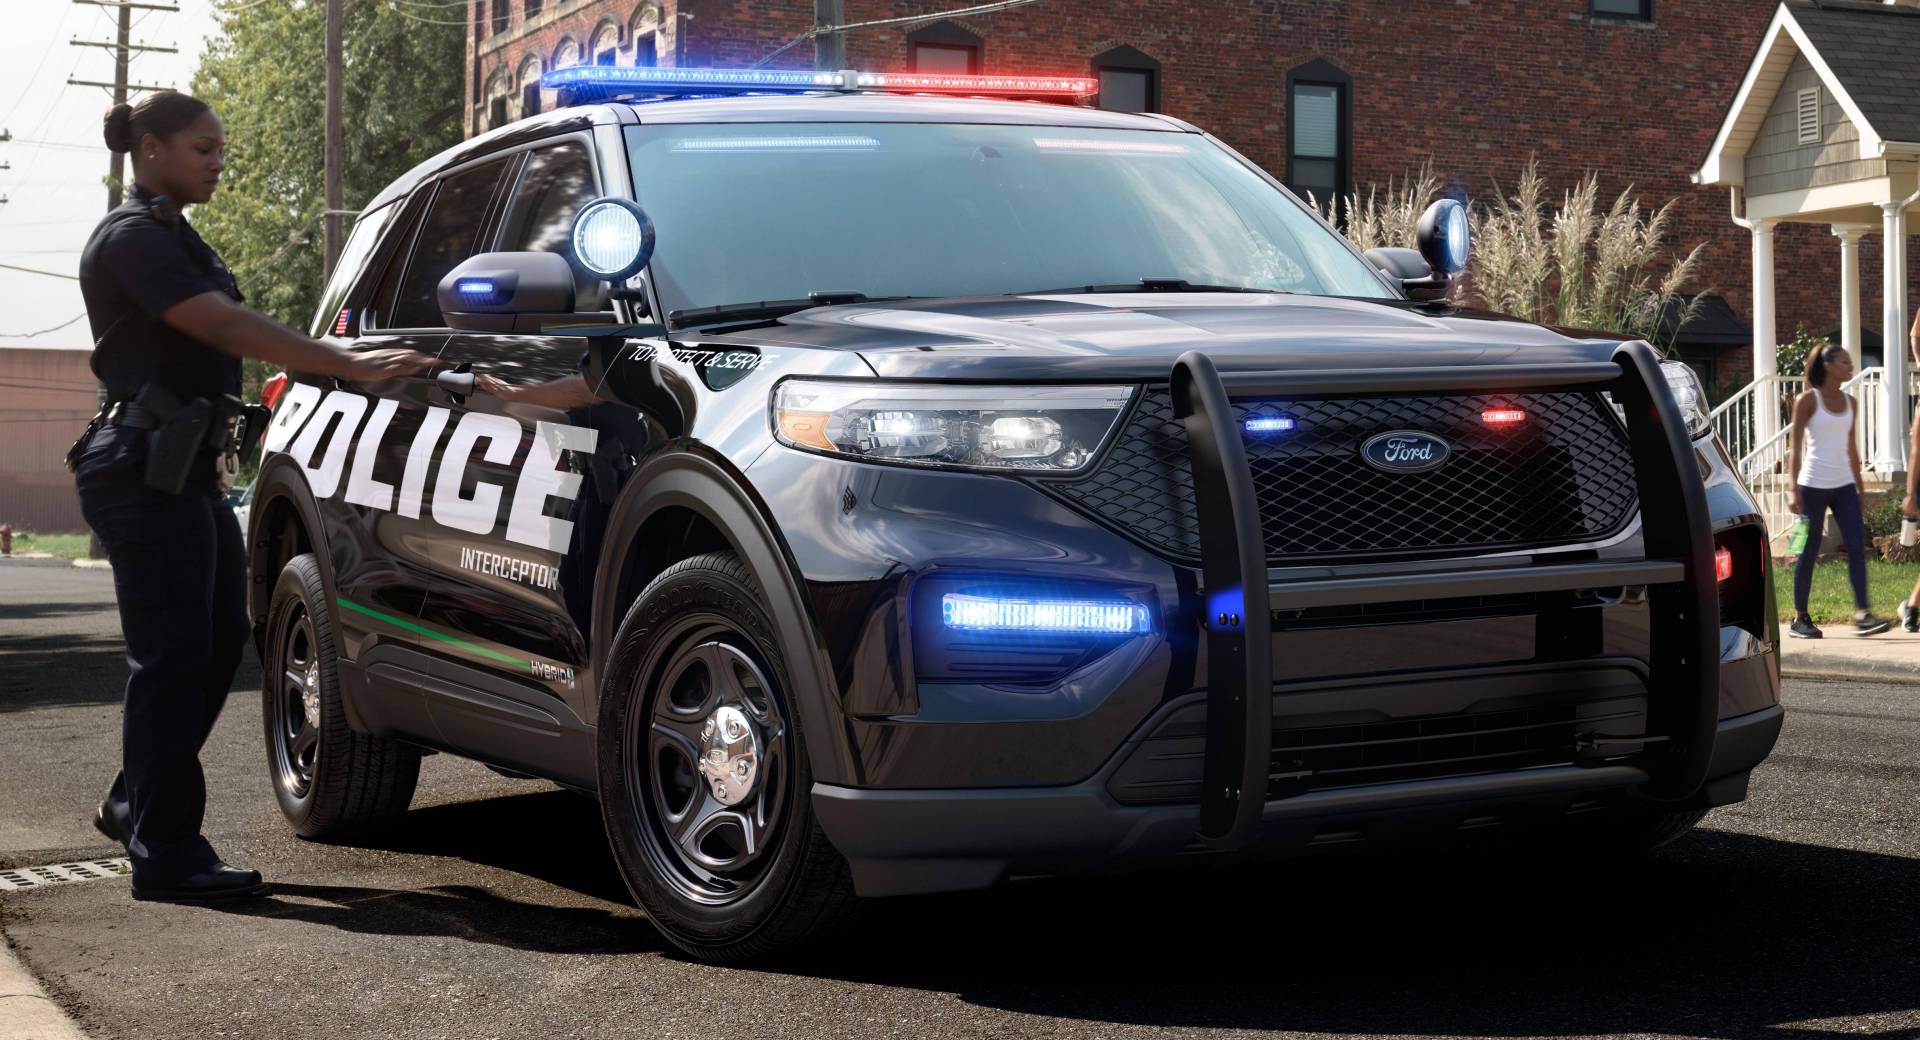 2020 Ford Police Interceptor Utility Hybrid Is 41 More Efficient